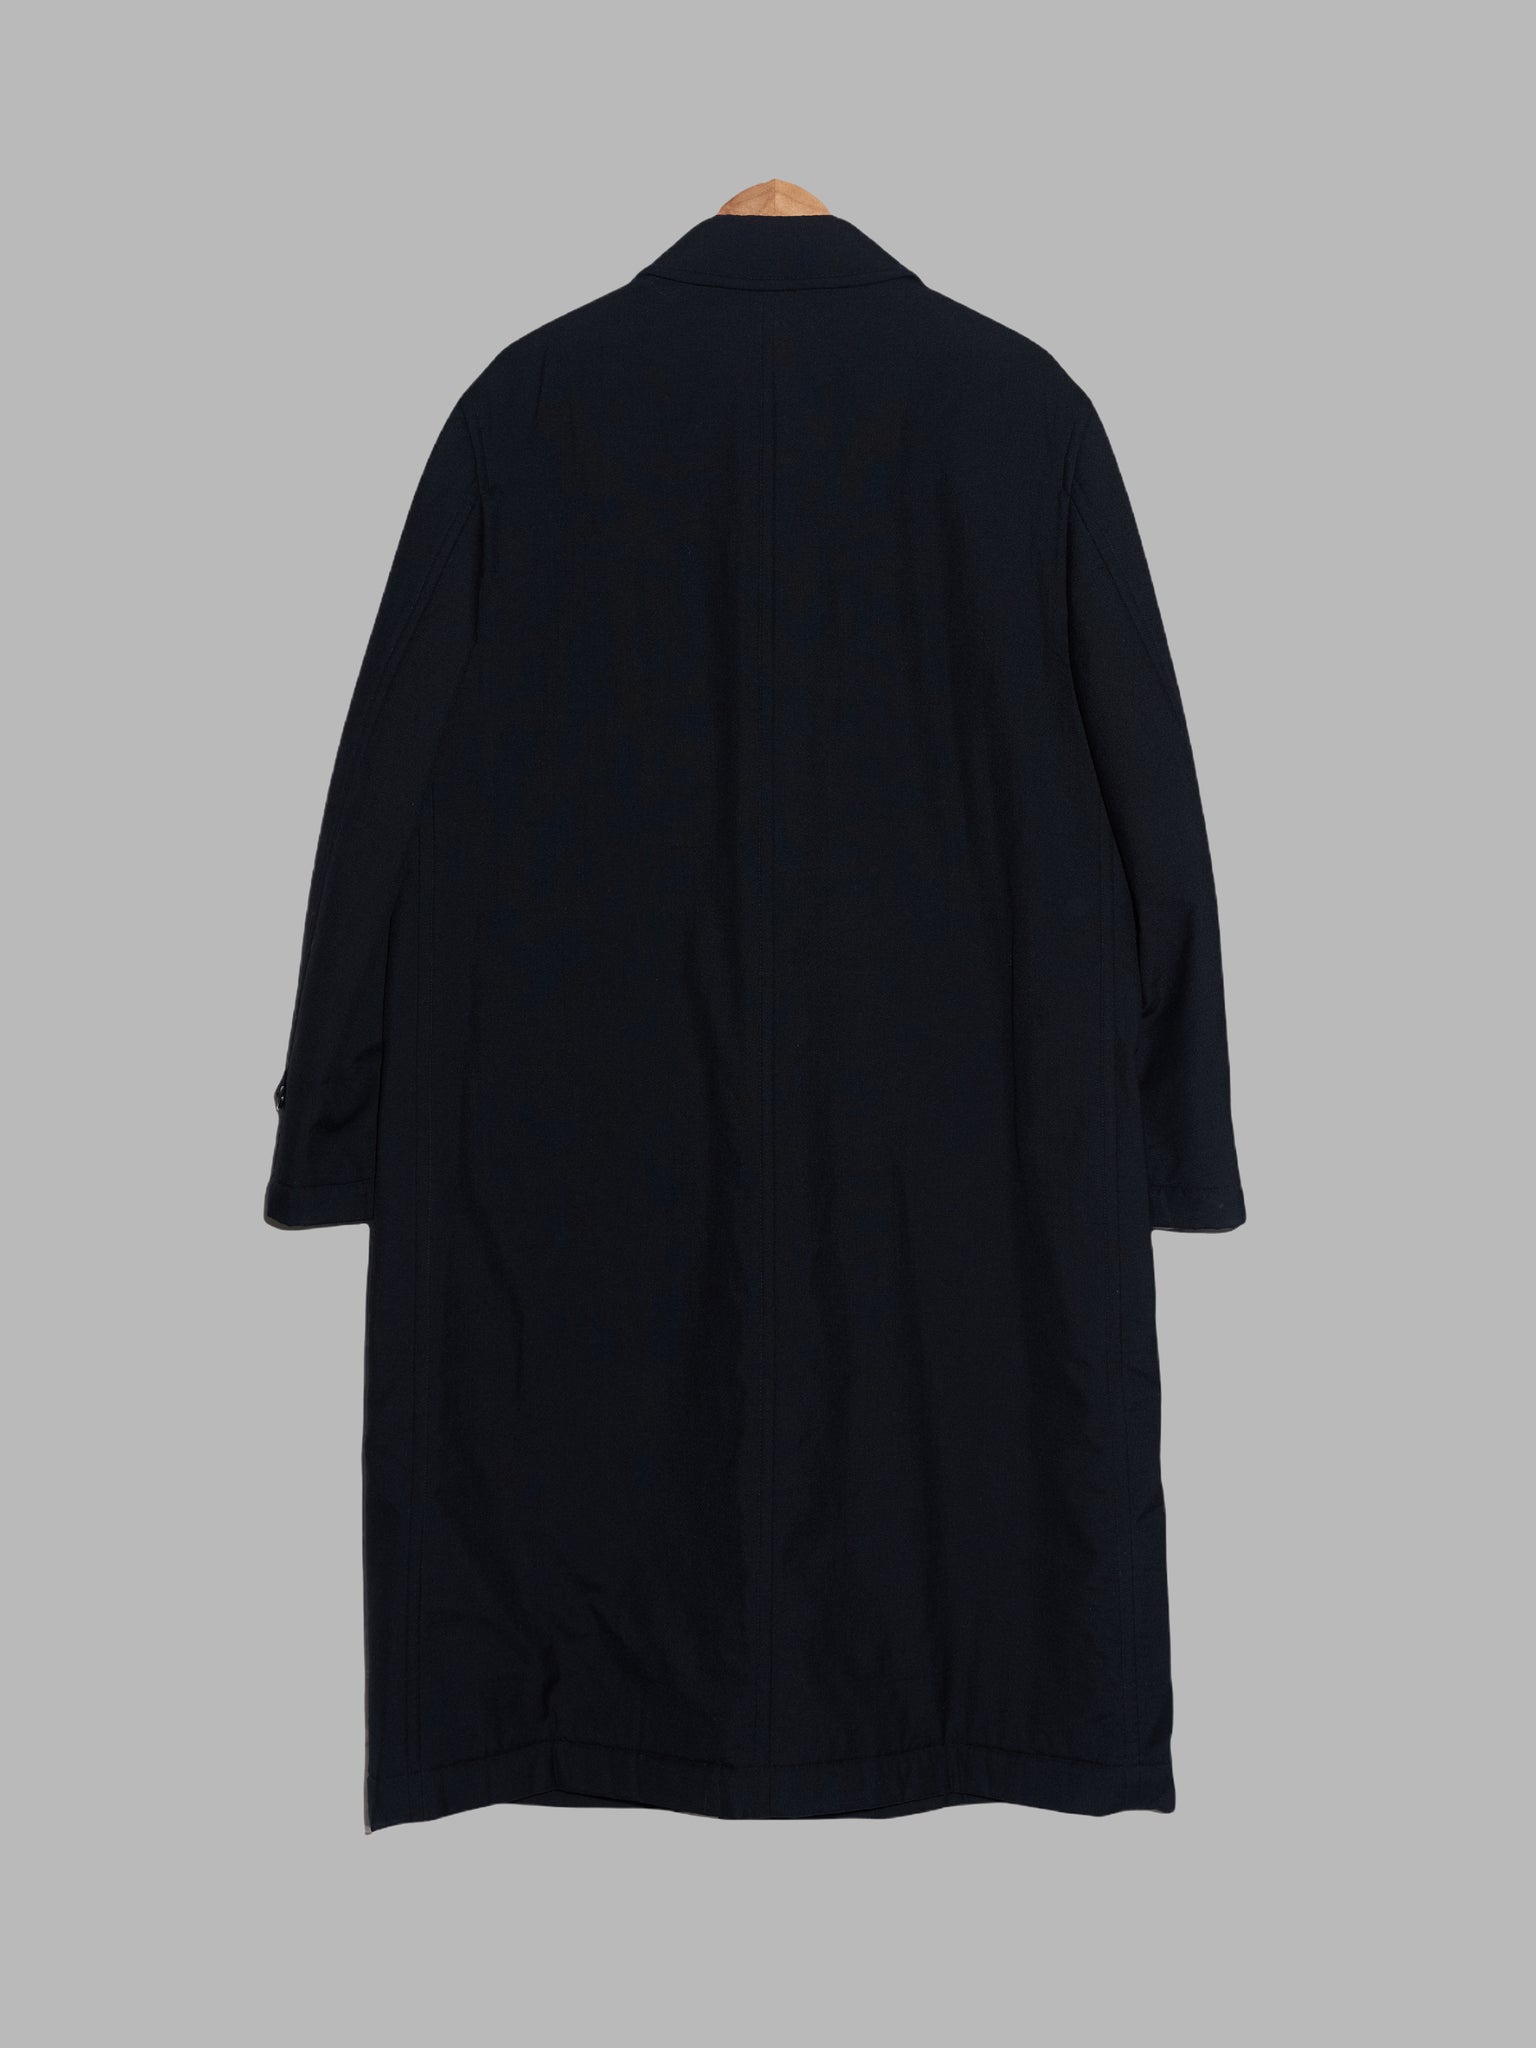 Comme des Garcons Homme AW1996 black bonded wool puffy covered placket coat - M